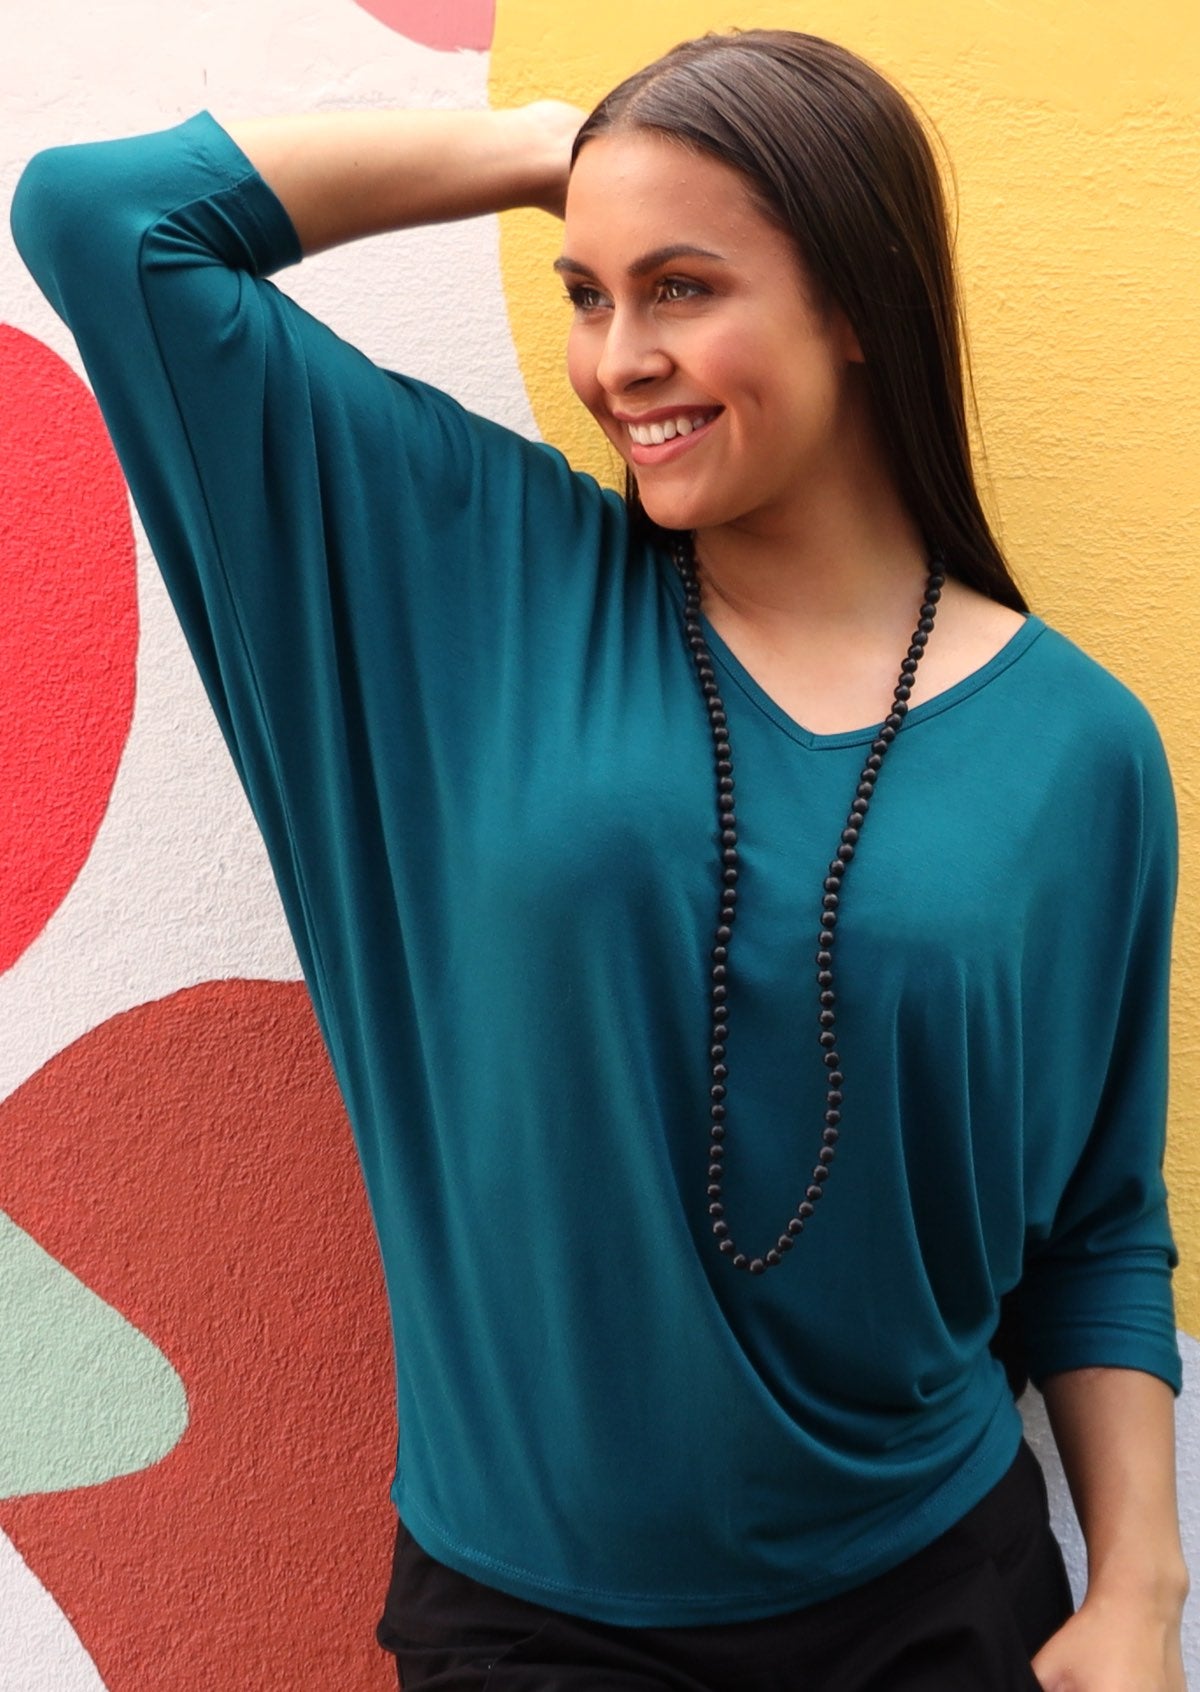 Woman wearing a 3/4 sleeve rayon batwing v-neck teal top in front of colourful wall.